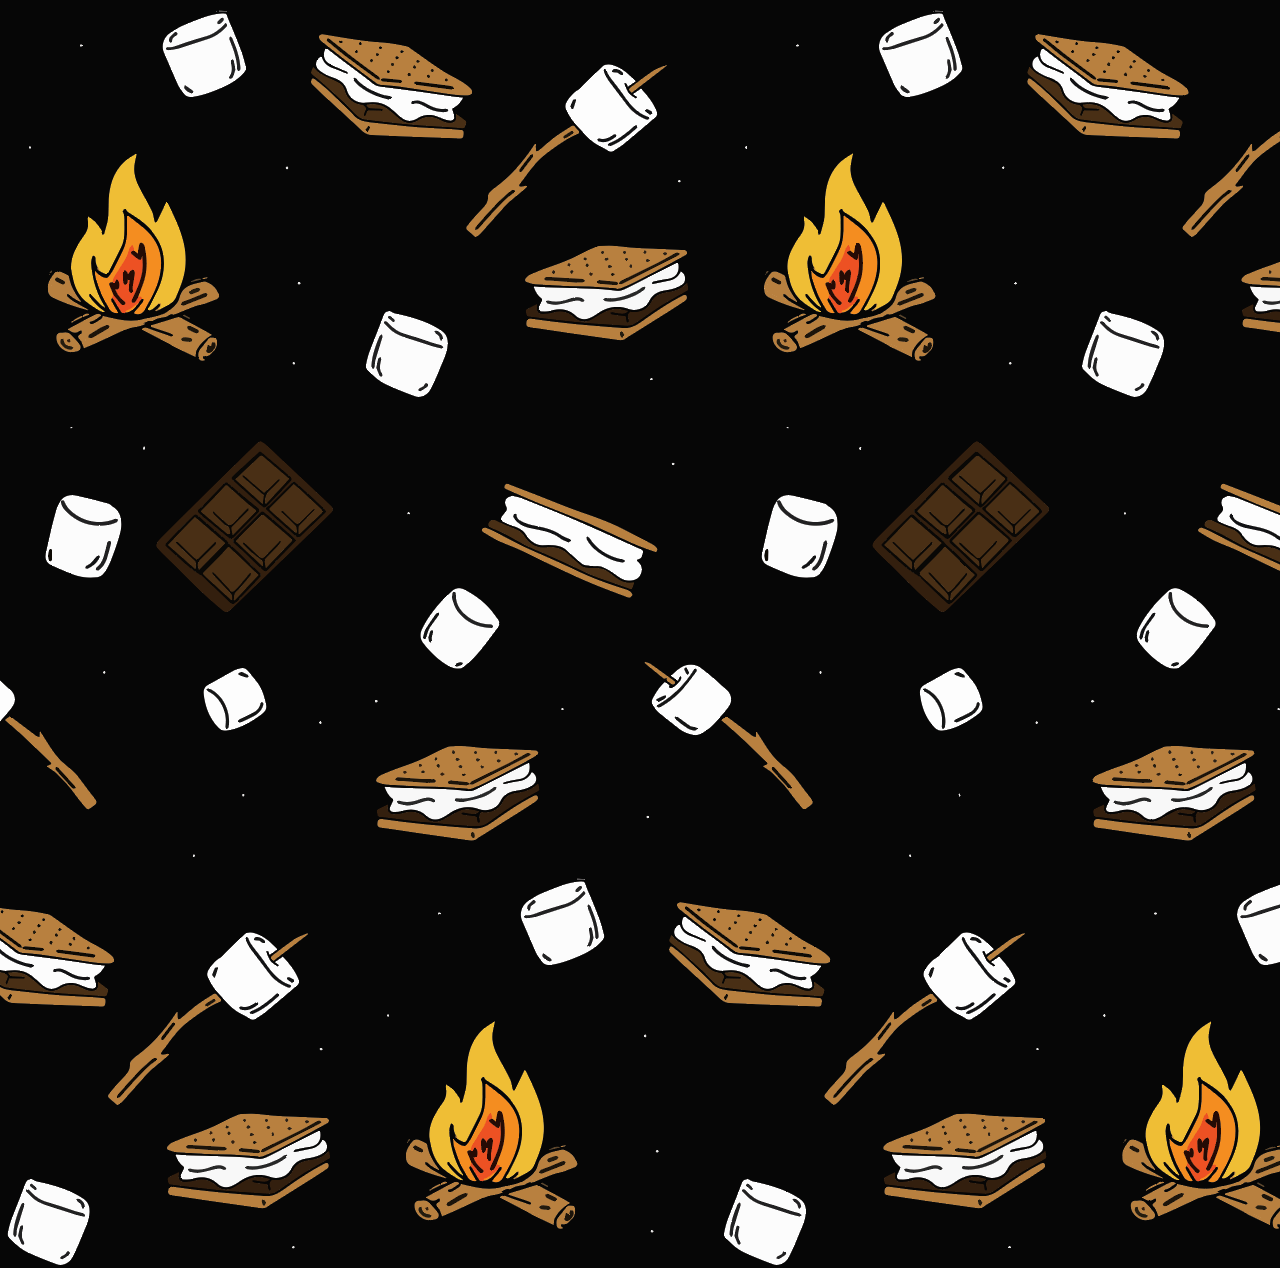 Midnight S'mores Bamboo Everywhere Blanket